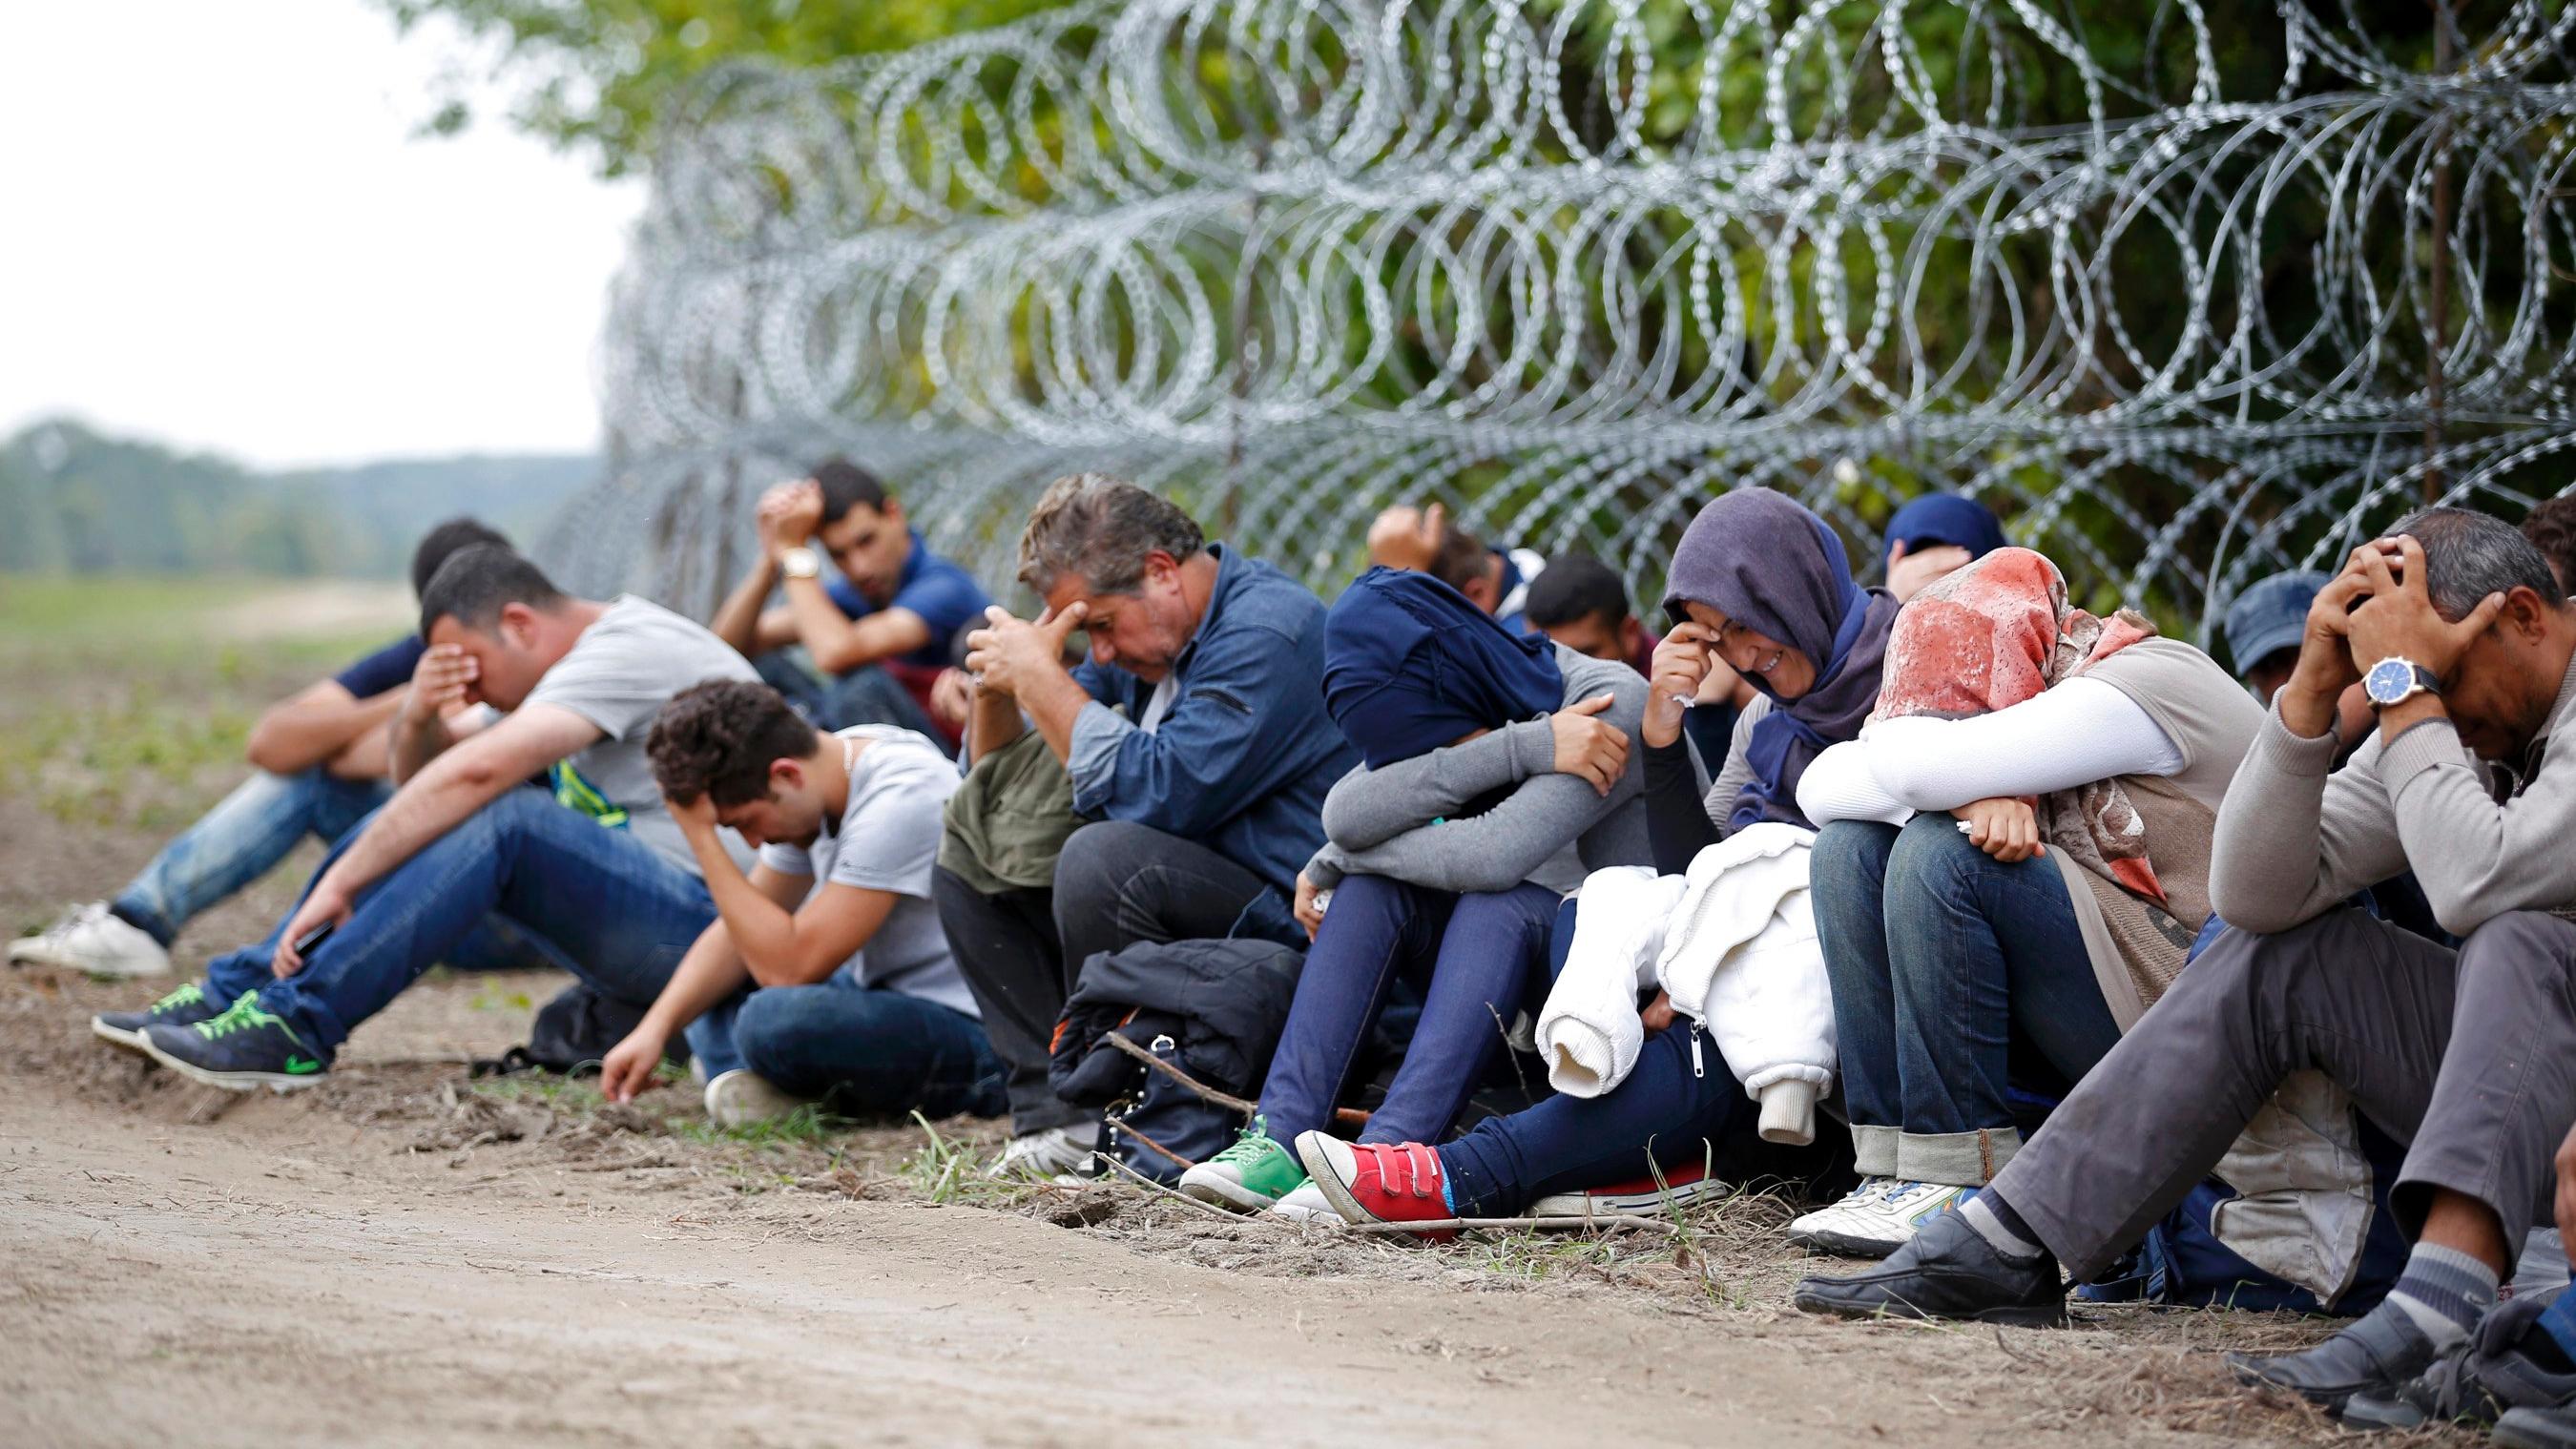 Detainees held by Hungarian authorities for undocumented border crossings.